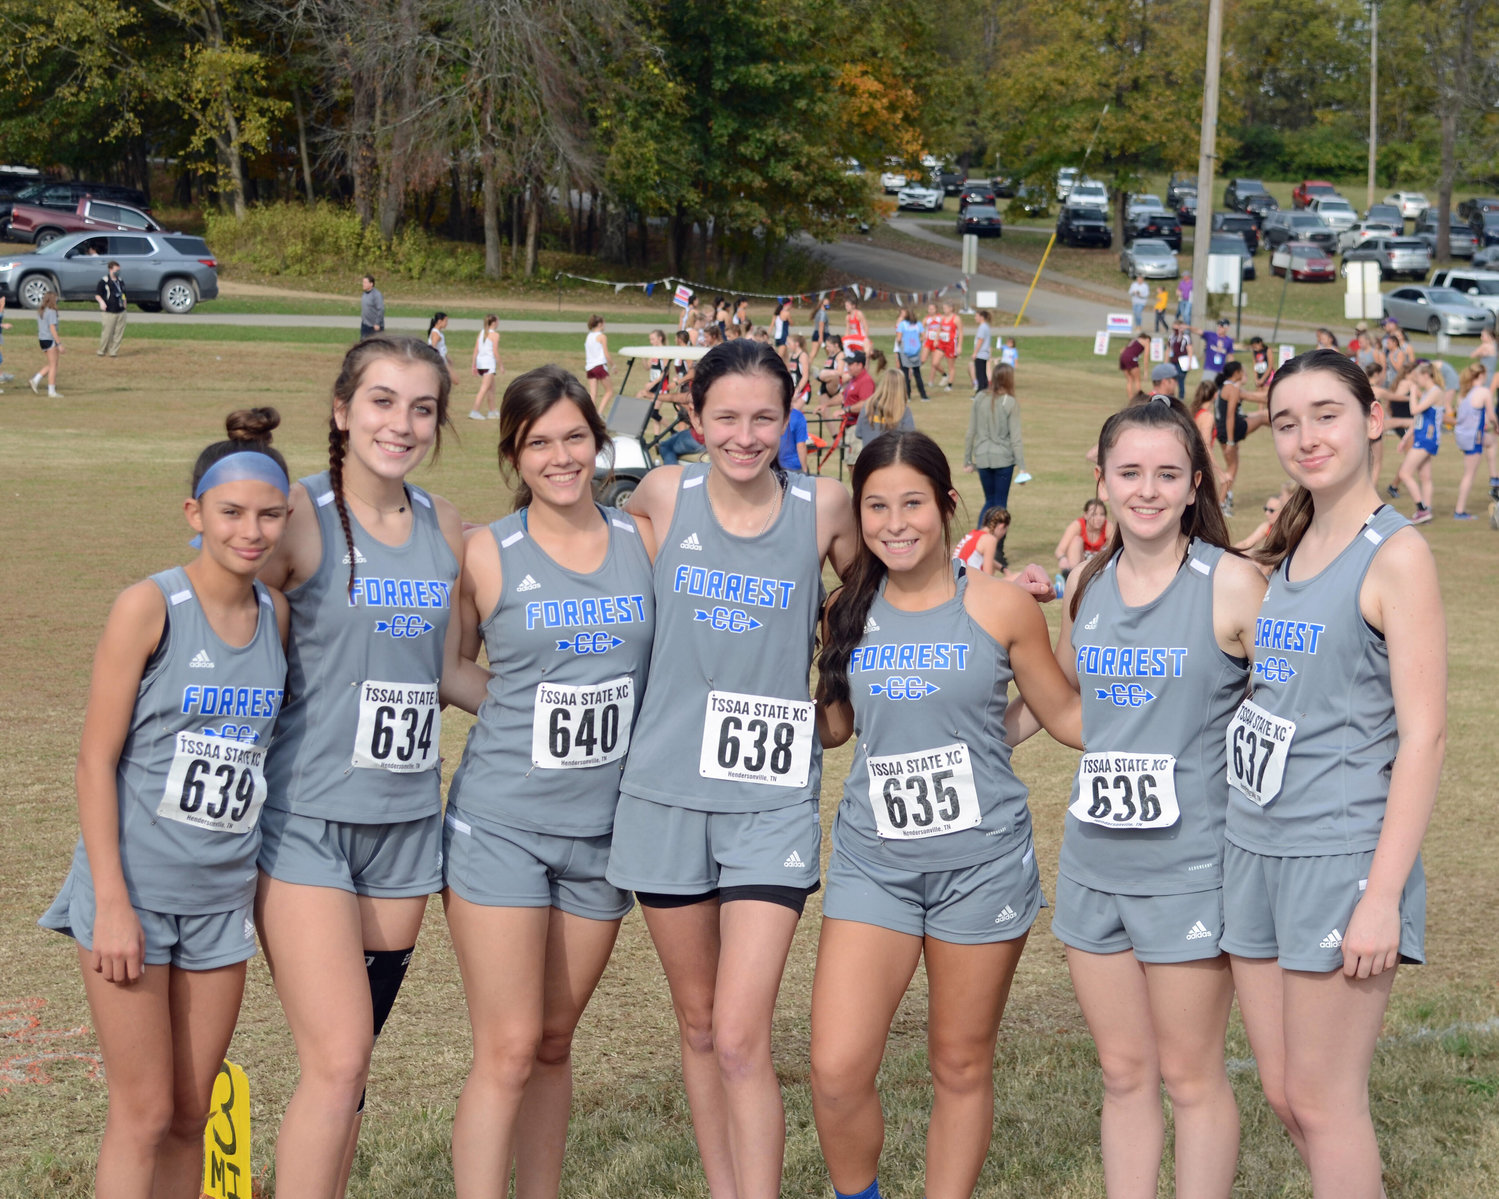 The Forrest girls from left, Jaedyn Stalnecker, Marysa Edde, Hannah Villazon, Amber Sanchez, Saryna Kurtz, Justina Mosley, and Micah Reasonover finished in 10th place at the TSSAA Cross Country Championships Thursday at Hendersonville.